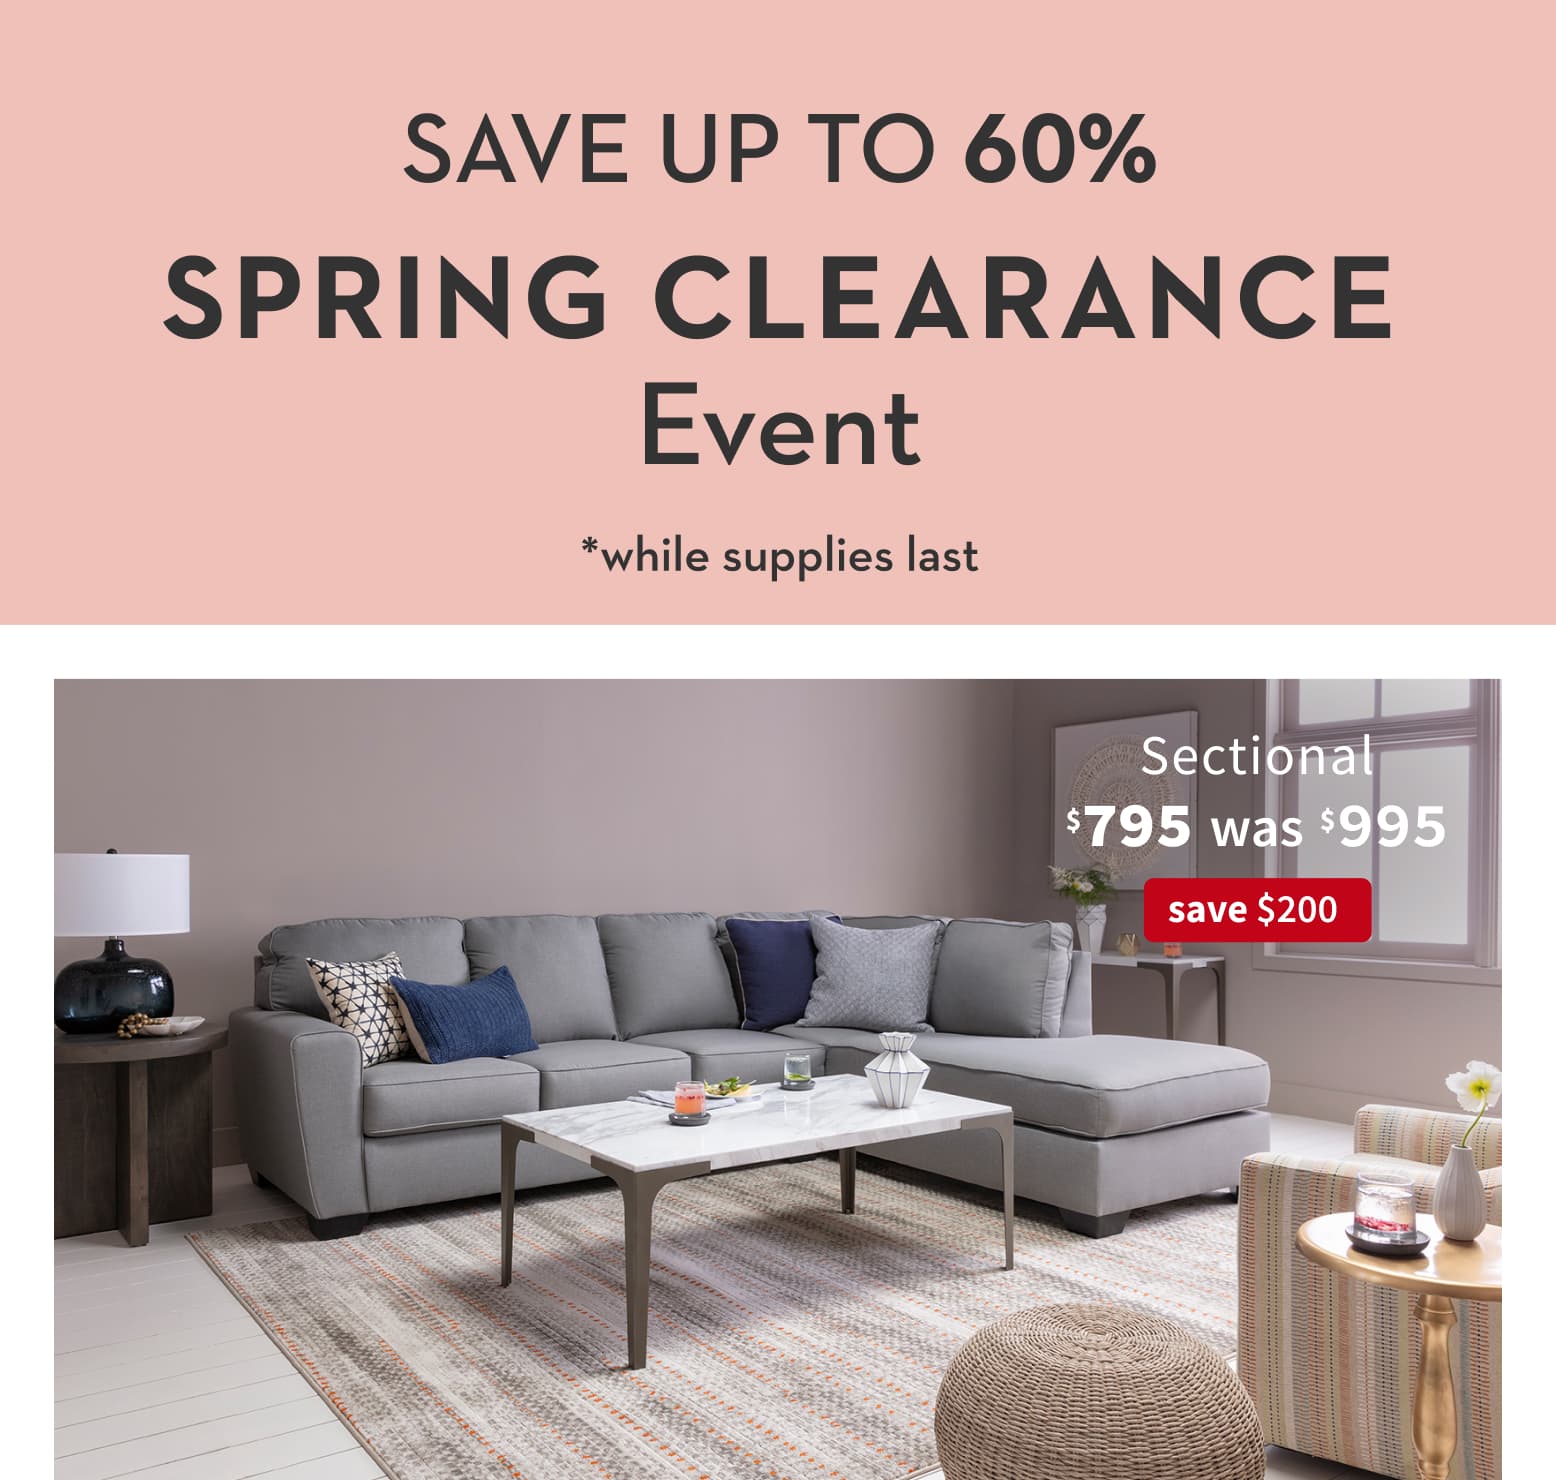 Save up to 60%. Spring Clearance Event *while supplies last. Sectional. $795 was $995. Save $200.